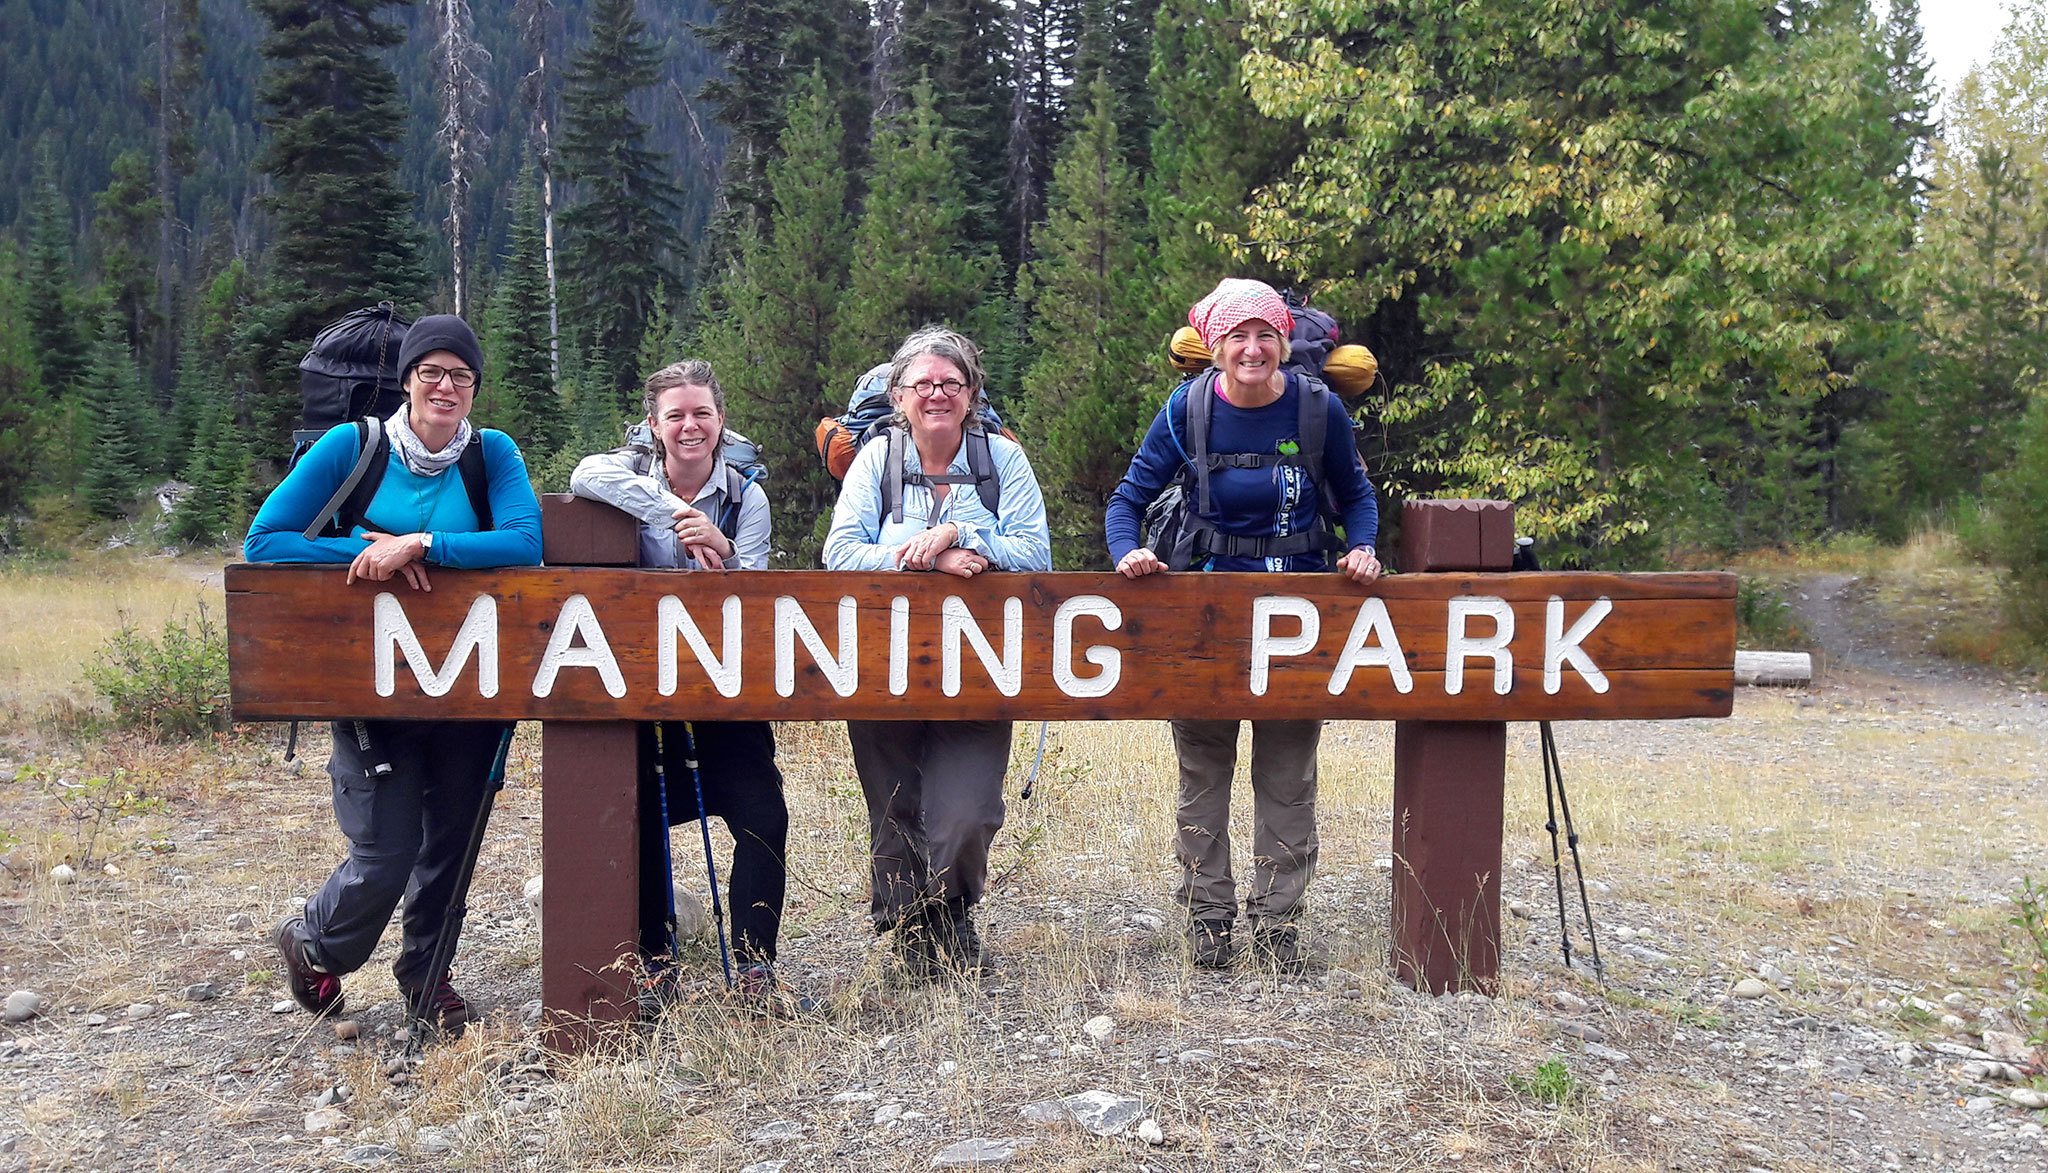 Jessi Loerch (second from left) poses for a photo with Denise, Margaret and Miranda, three friends she met on the Pacific Crest Trail. (Courtesy photo)